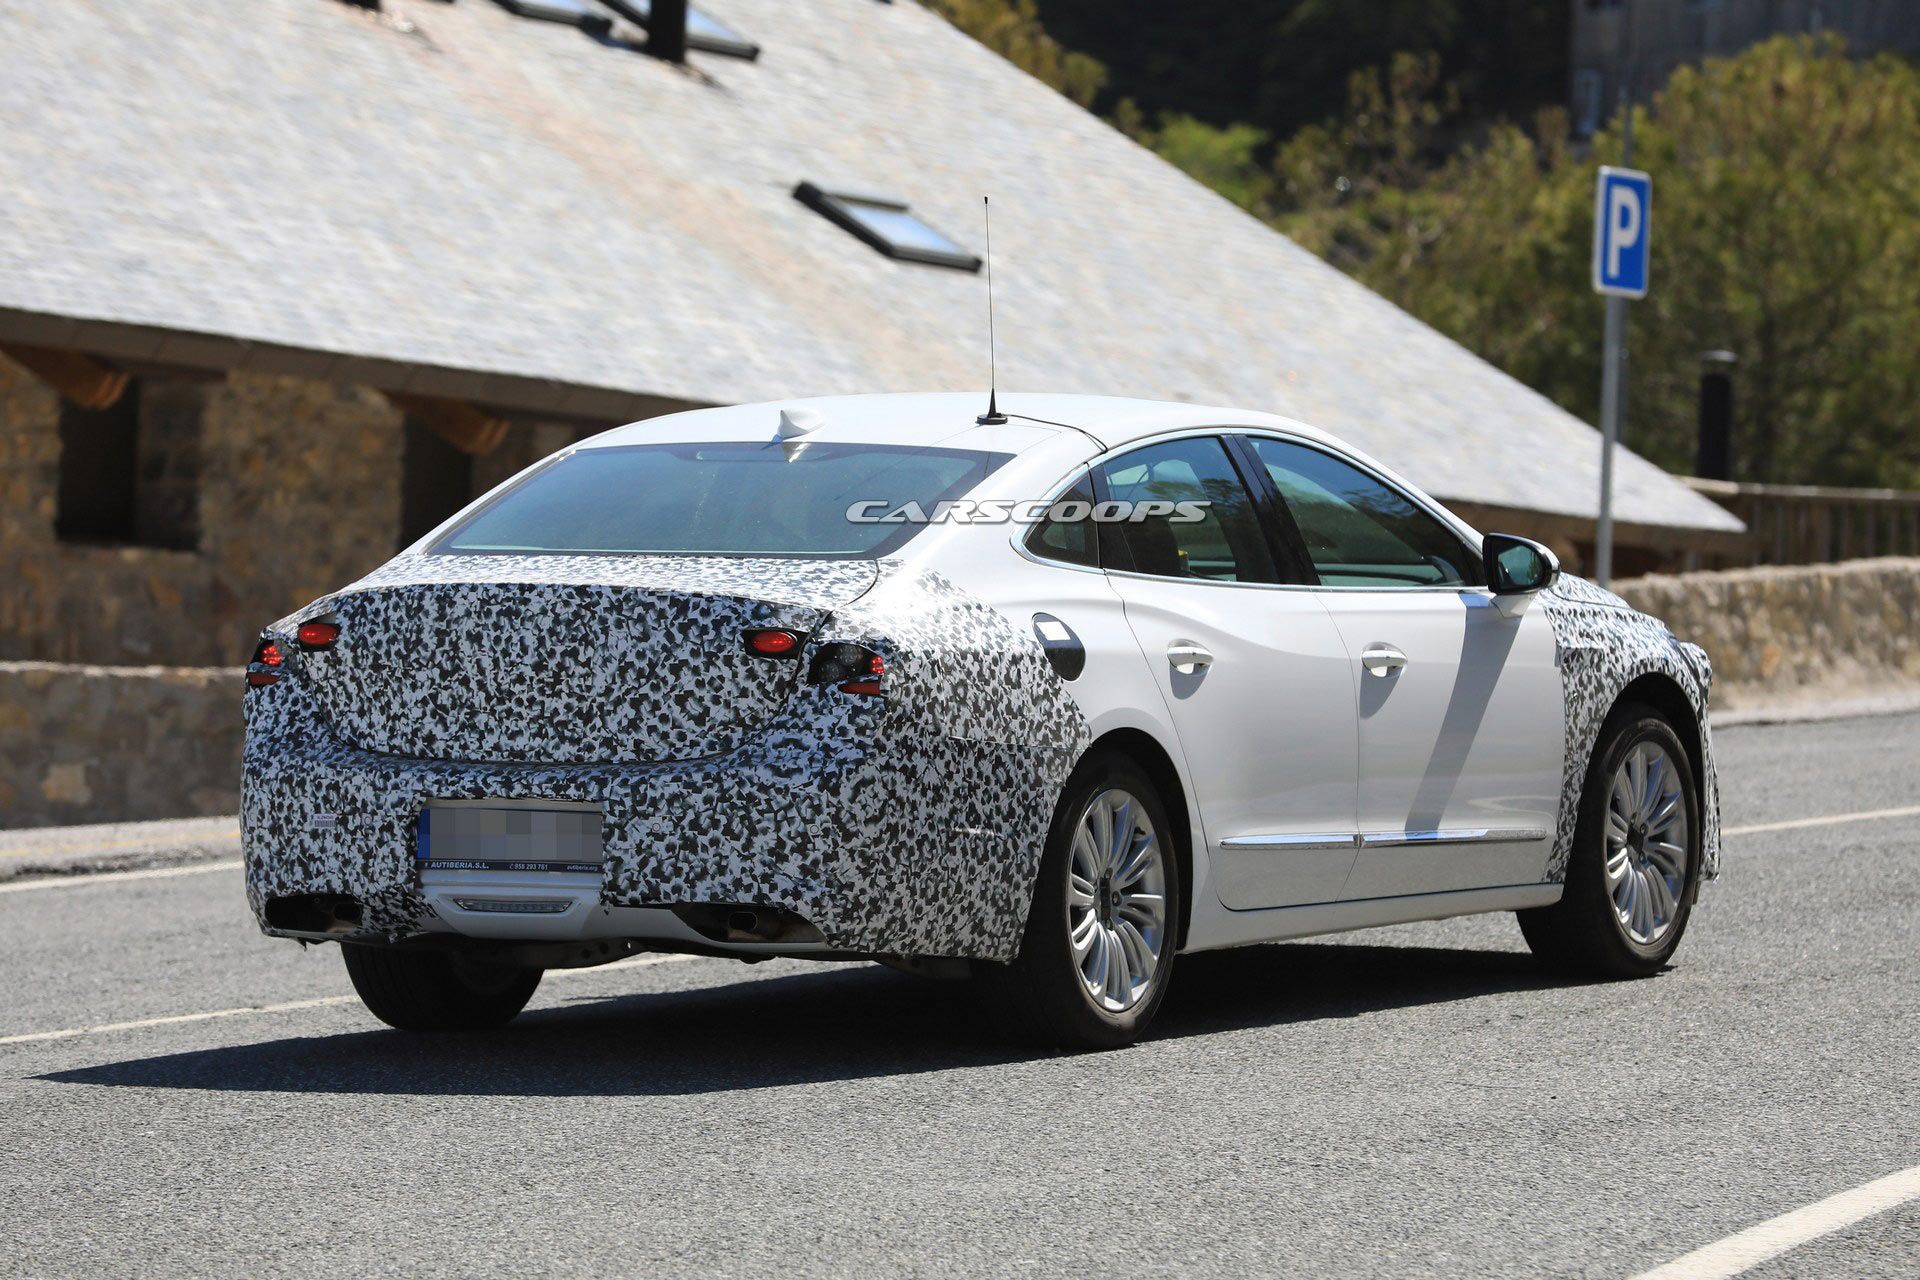 2020 Buick Lacrosse Facelift Spied With Minor Styling Changes